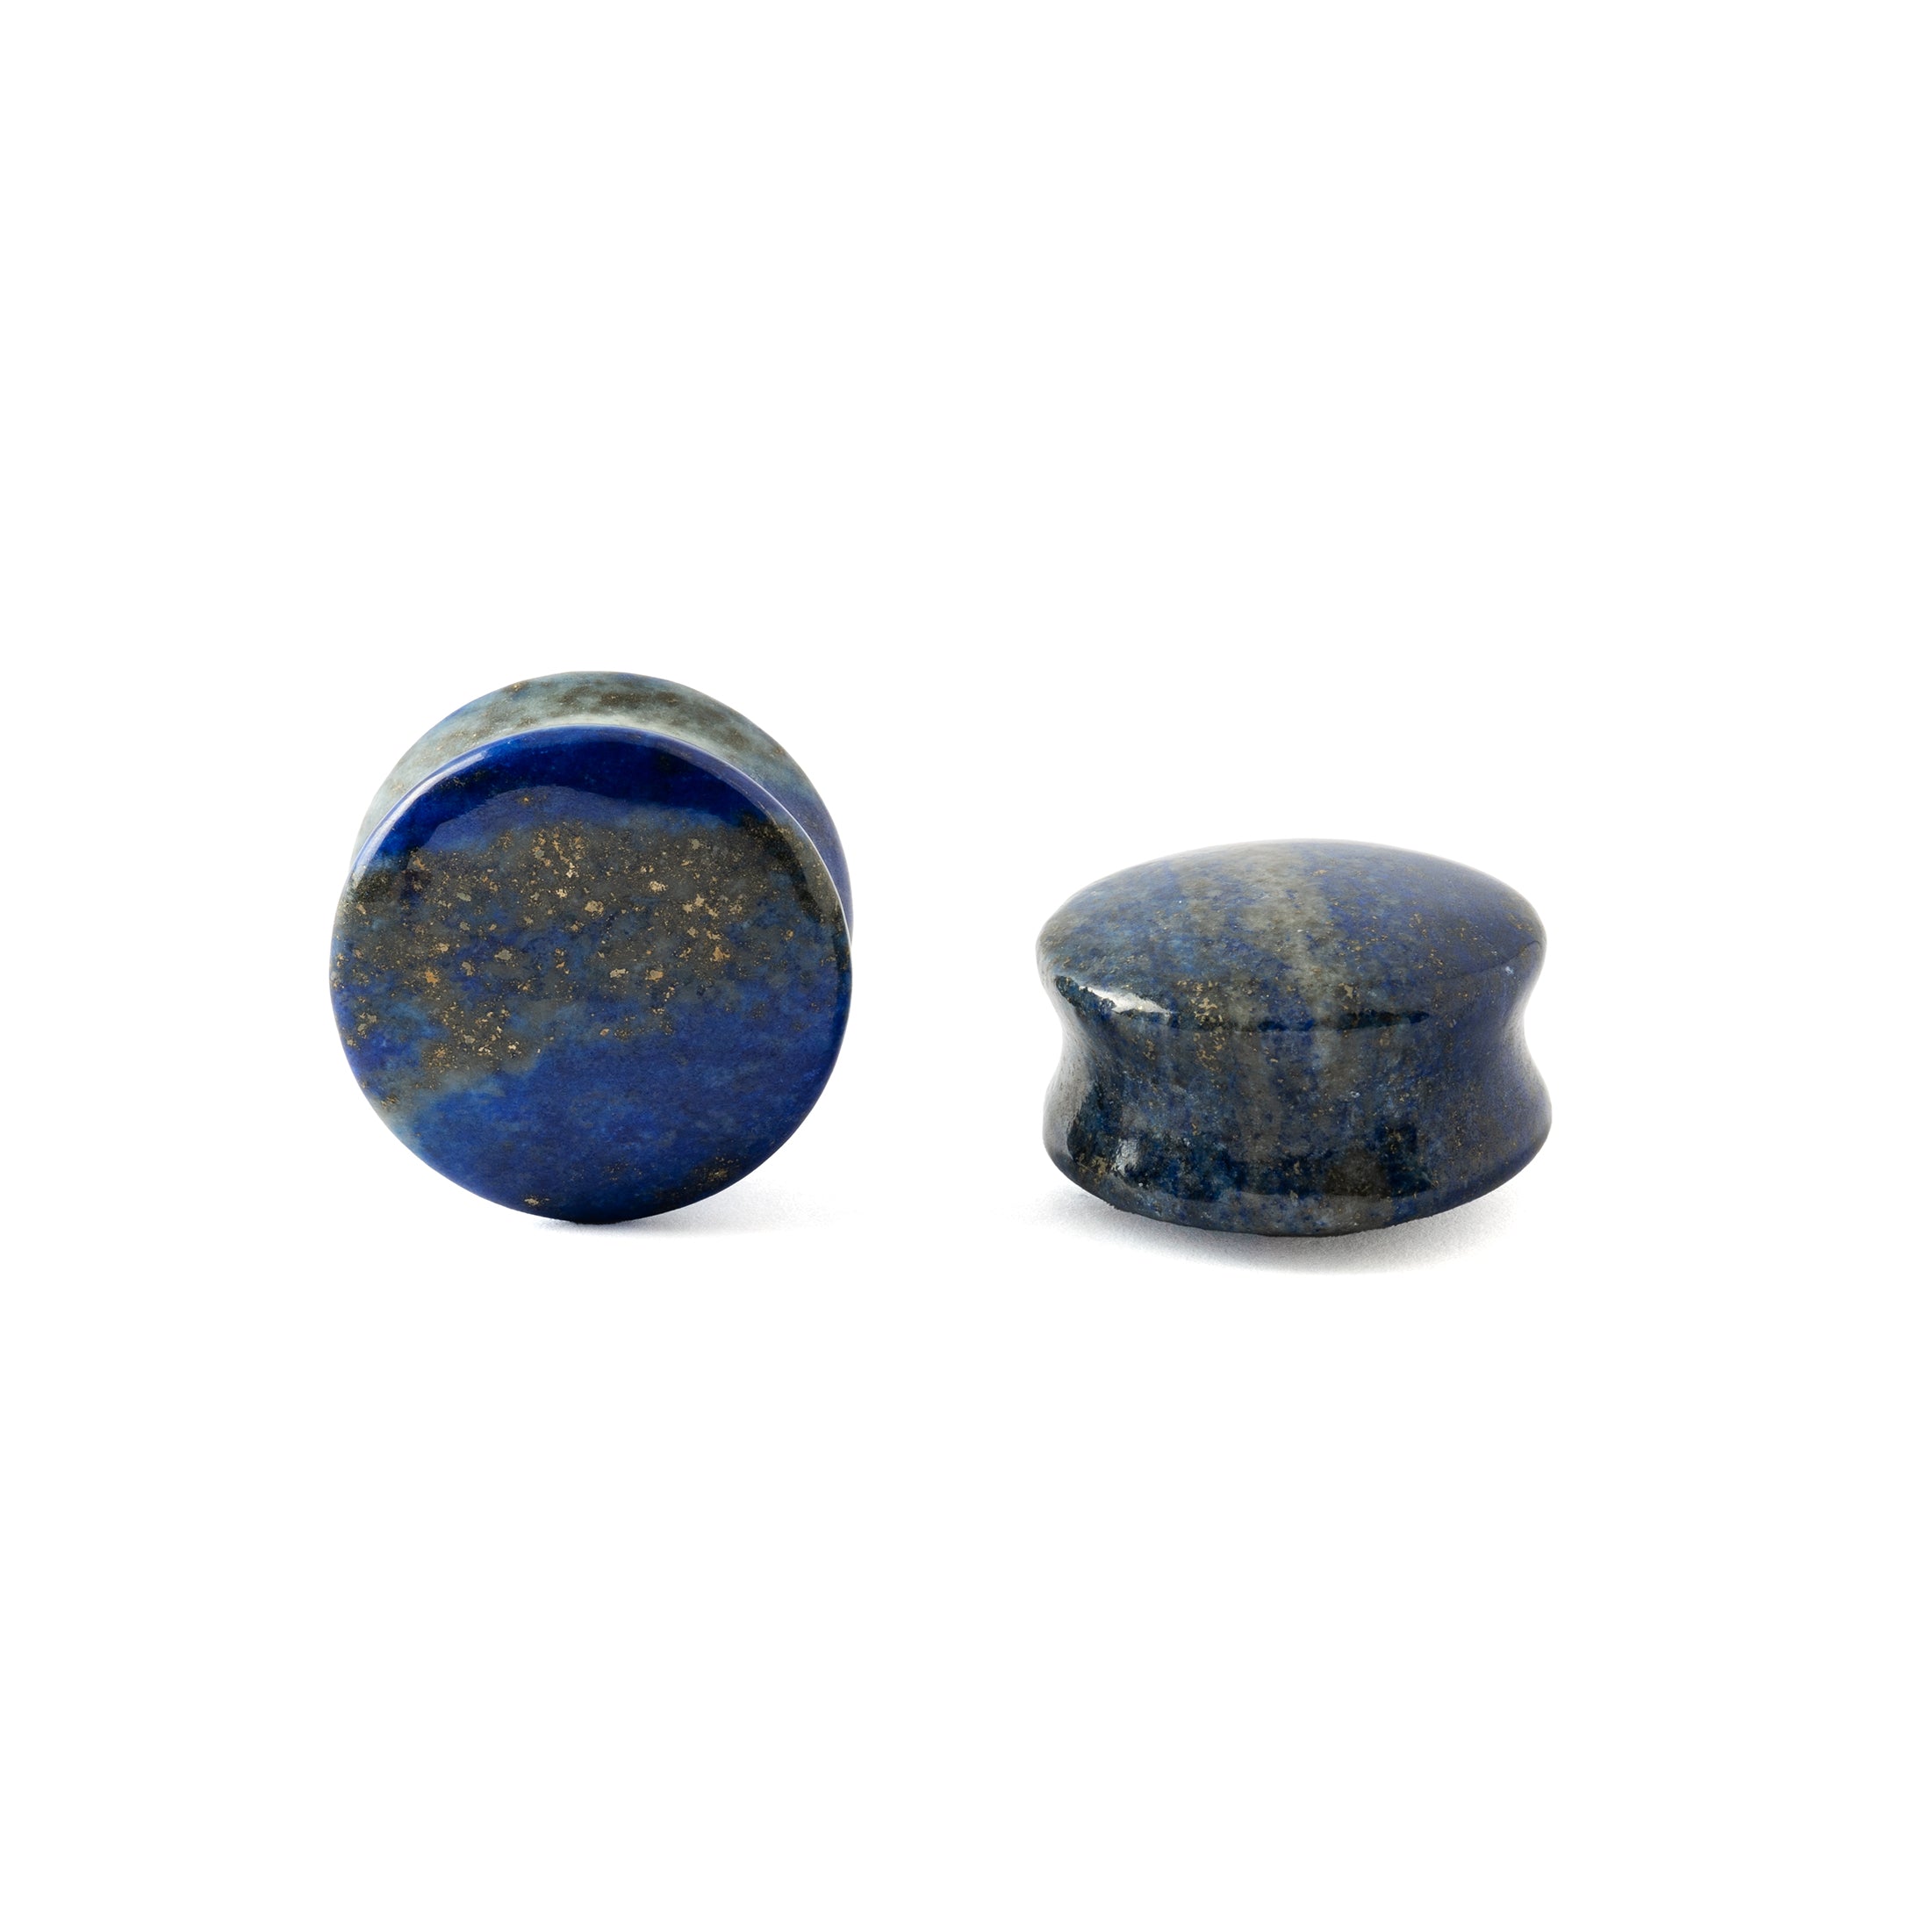 Two Lapis Lazuli Plugs front and side view